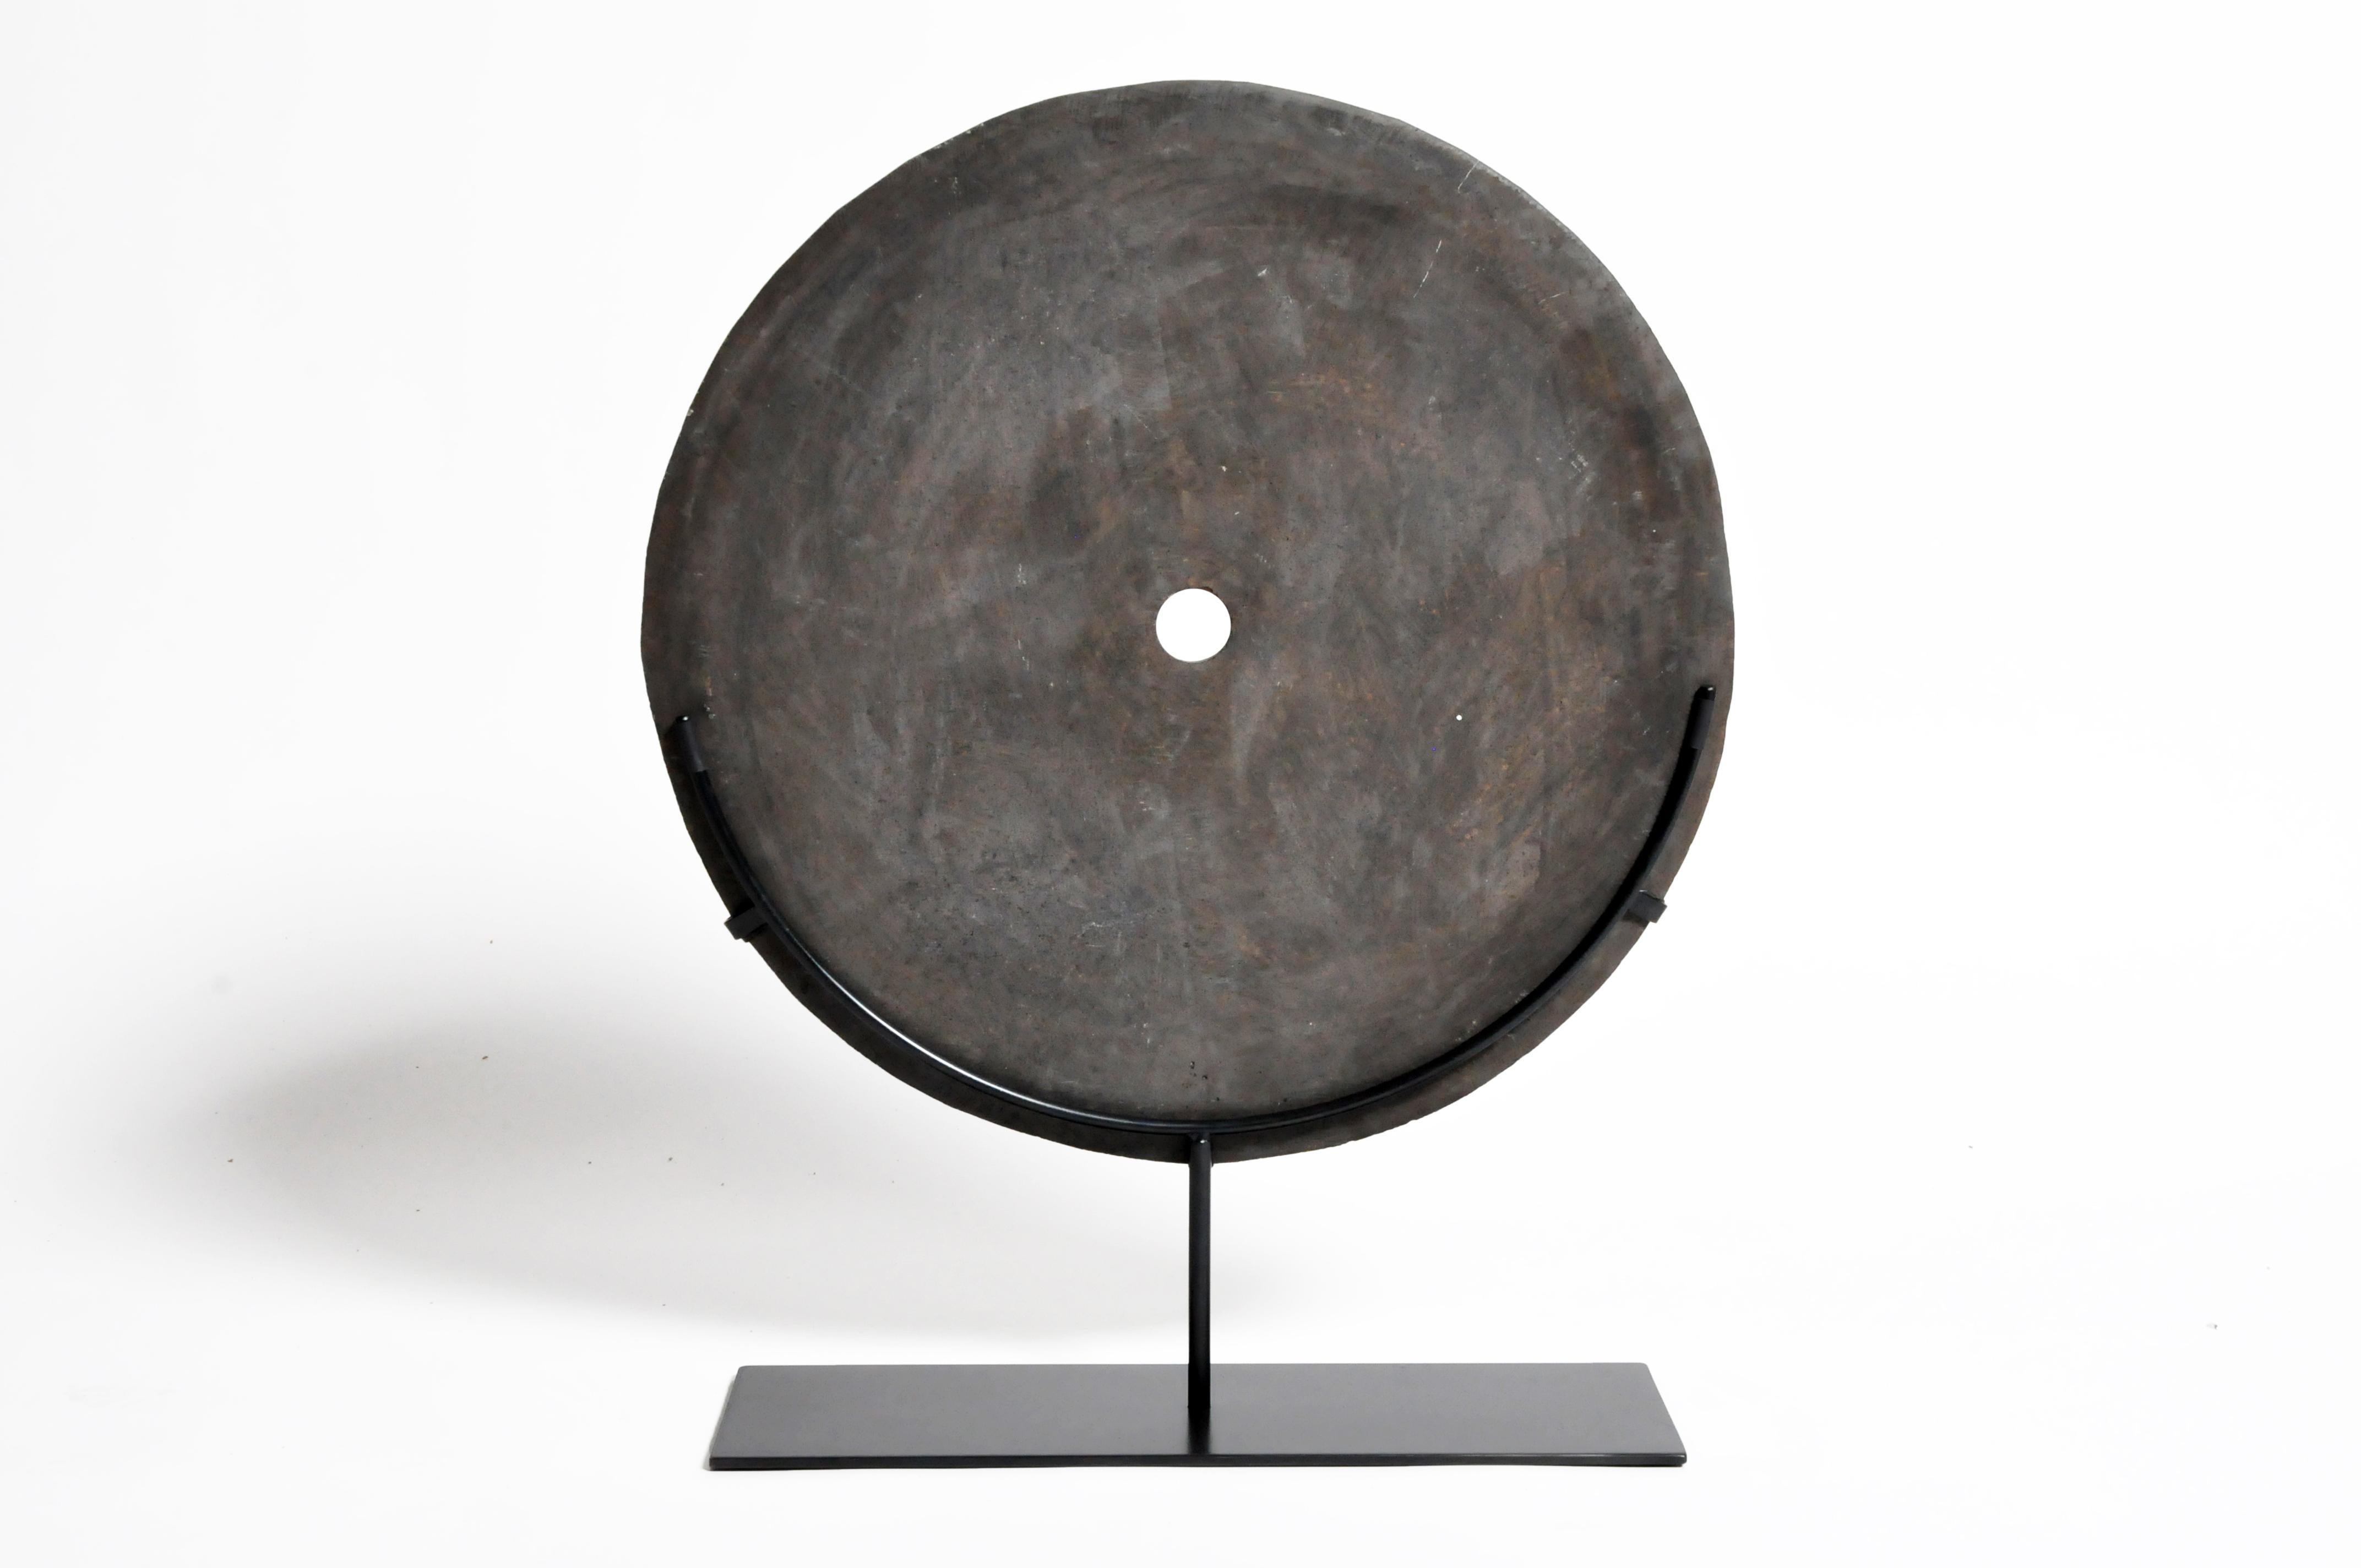 This stone grinding disk is from Timor and was made from basalt stone, circa 20th century. It is been mounted on a metal stand for display.